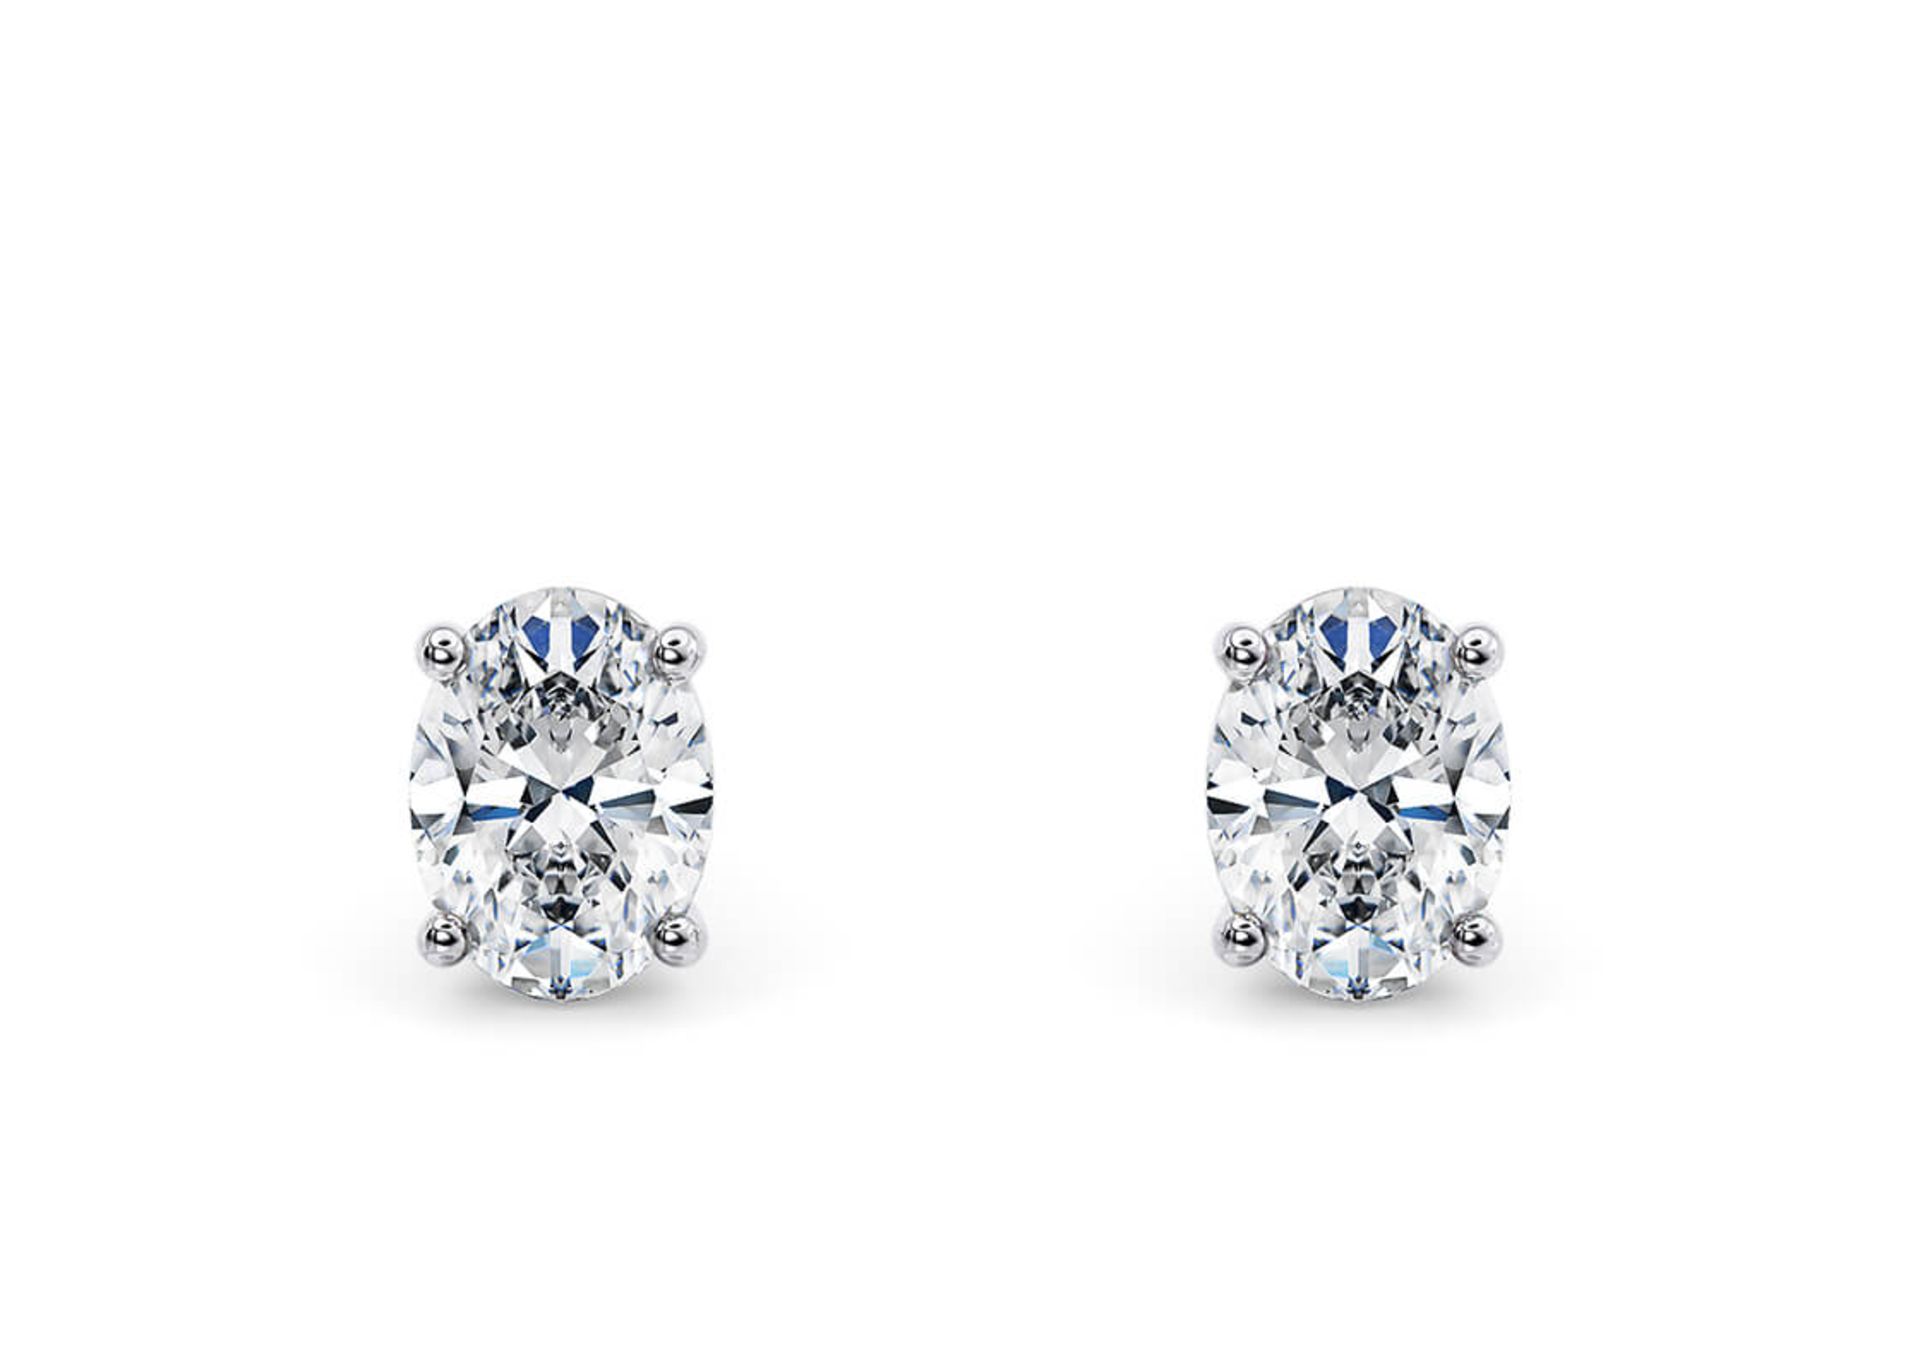 Oval Cut 2.00 Carat Natural Diamond Earrings Set in 18kt White Gold - F Colour SI Clarity - GIA - Image 2 of 3